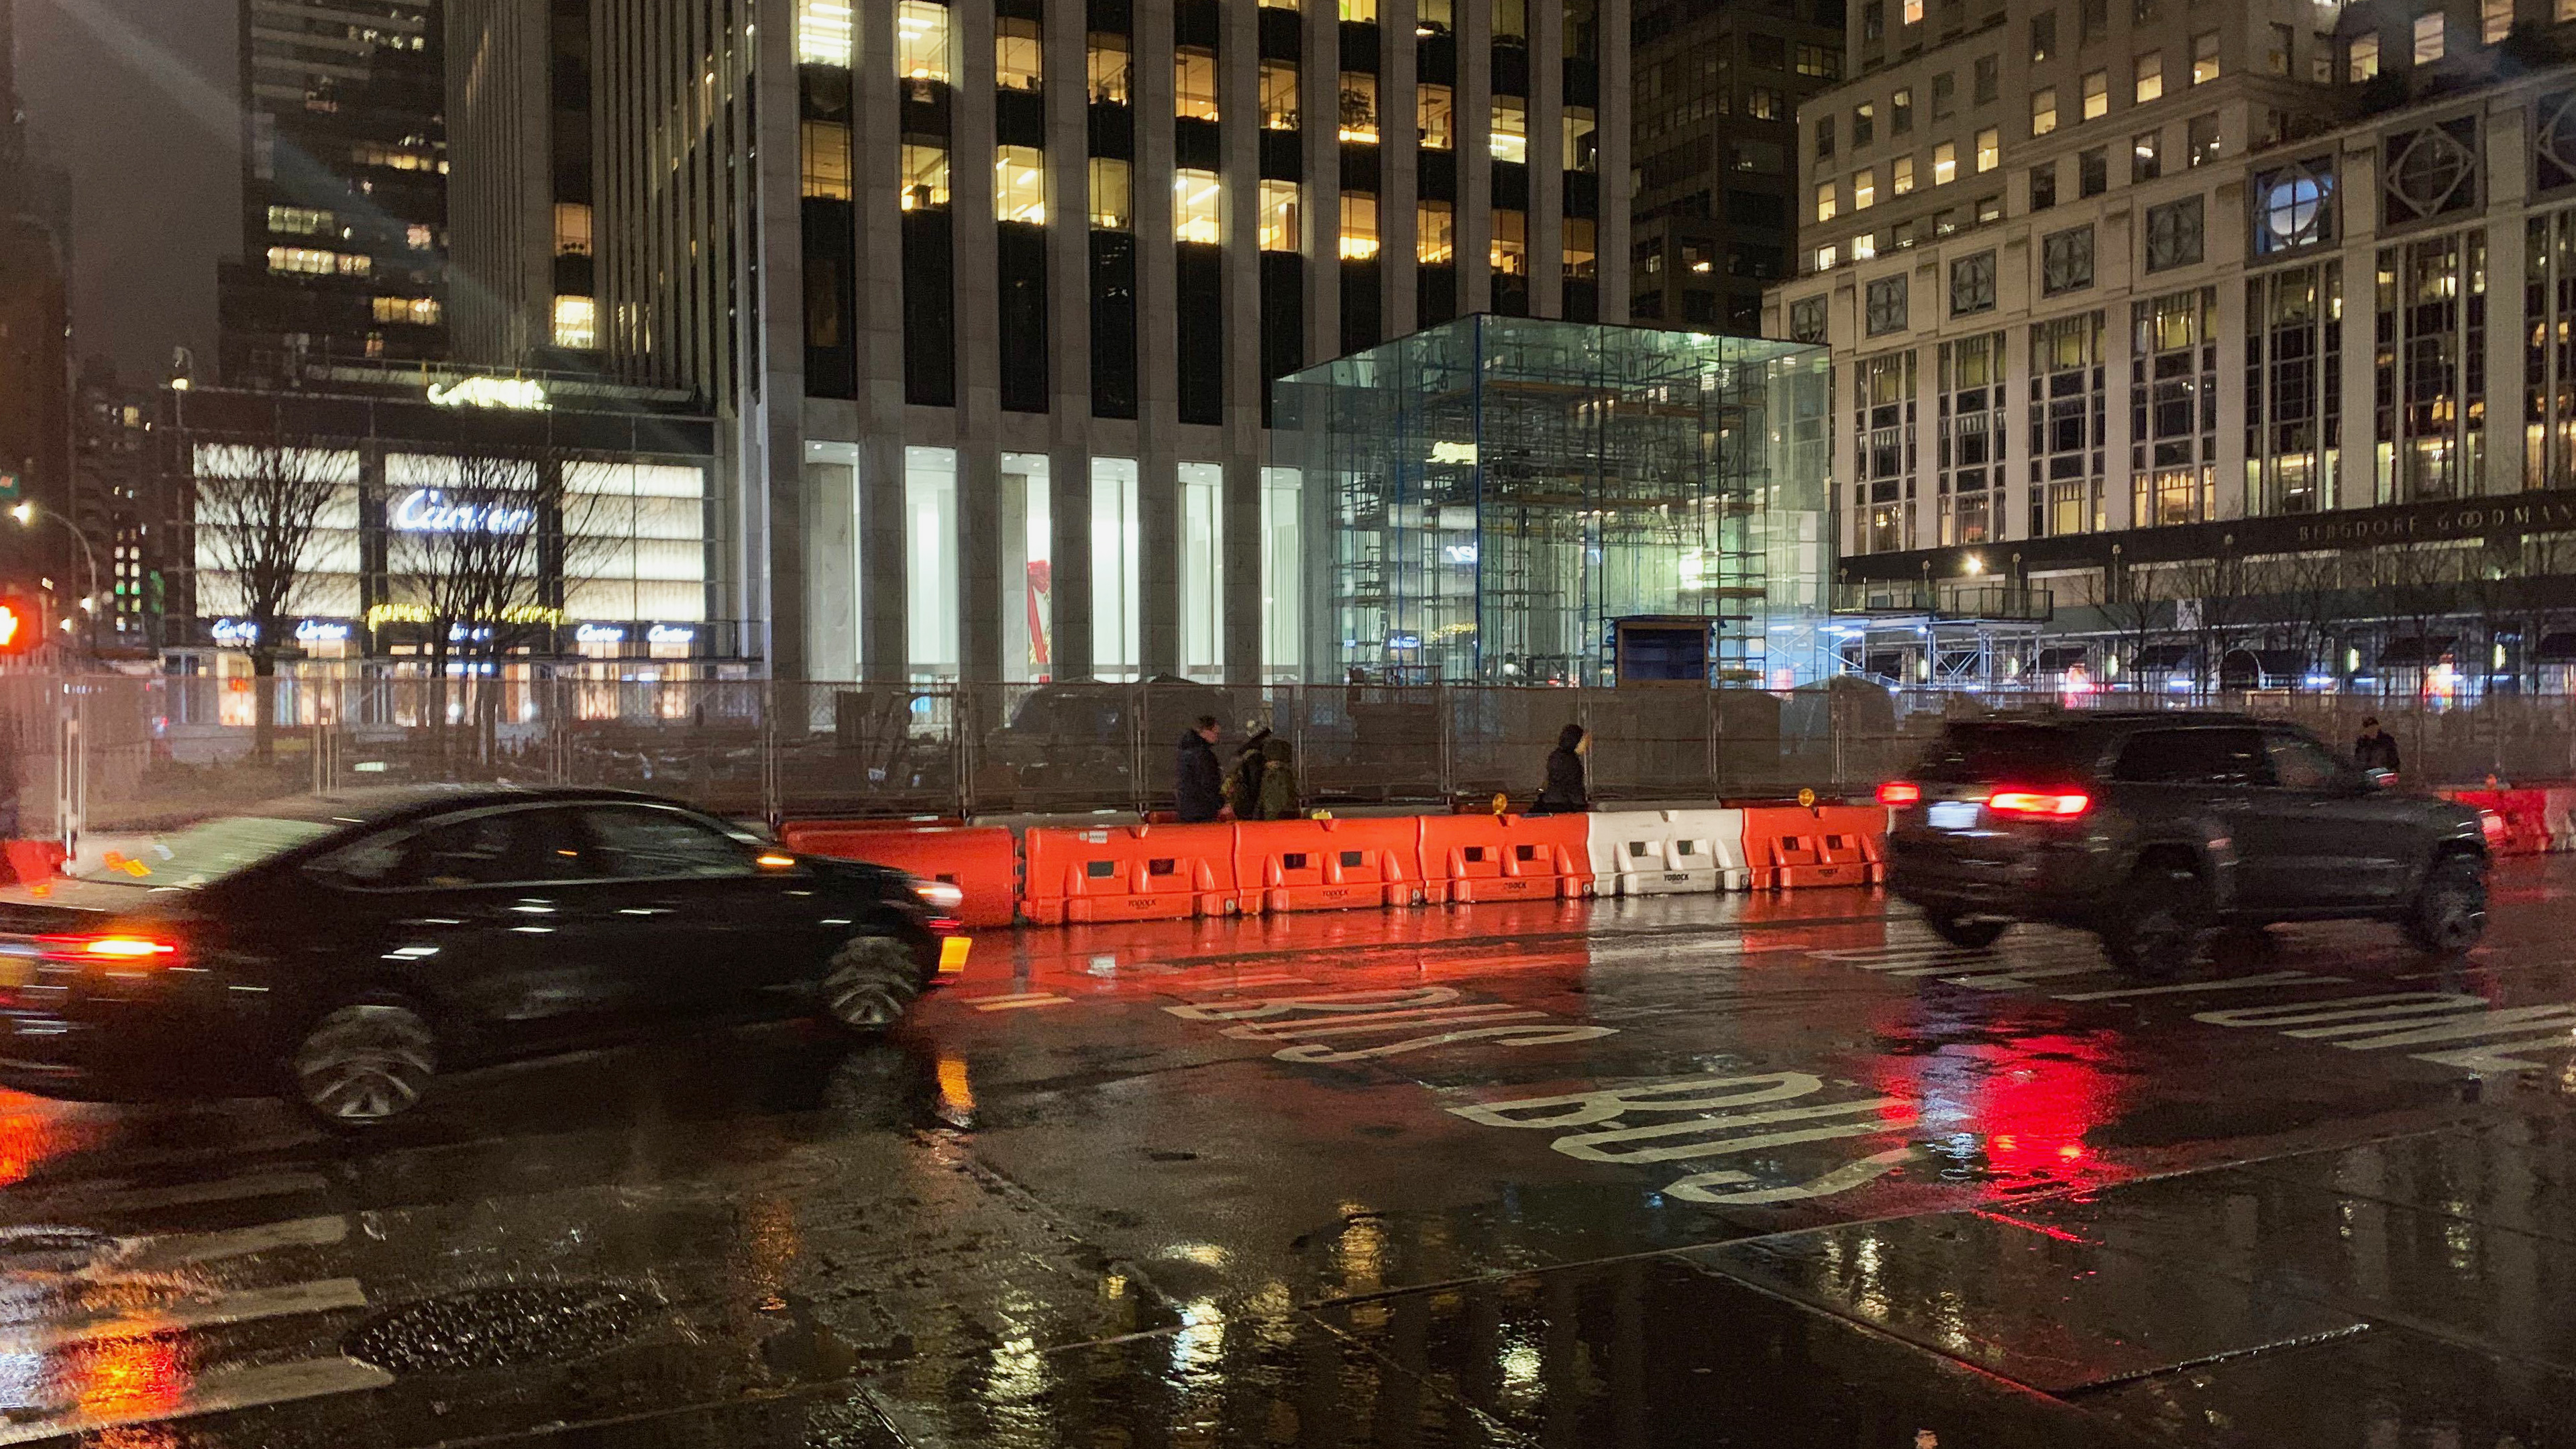 Apple Store Fifth Avenue reopening: We go inside 'The Cube' - CNET